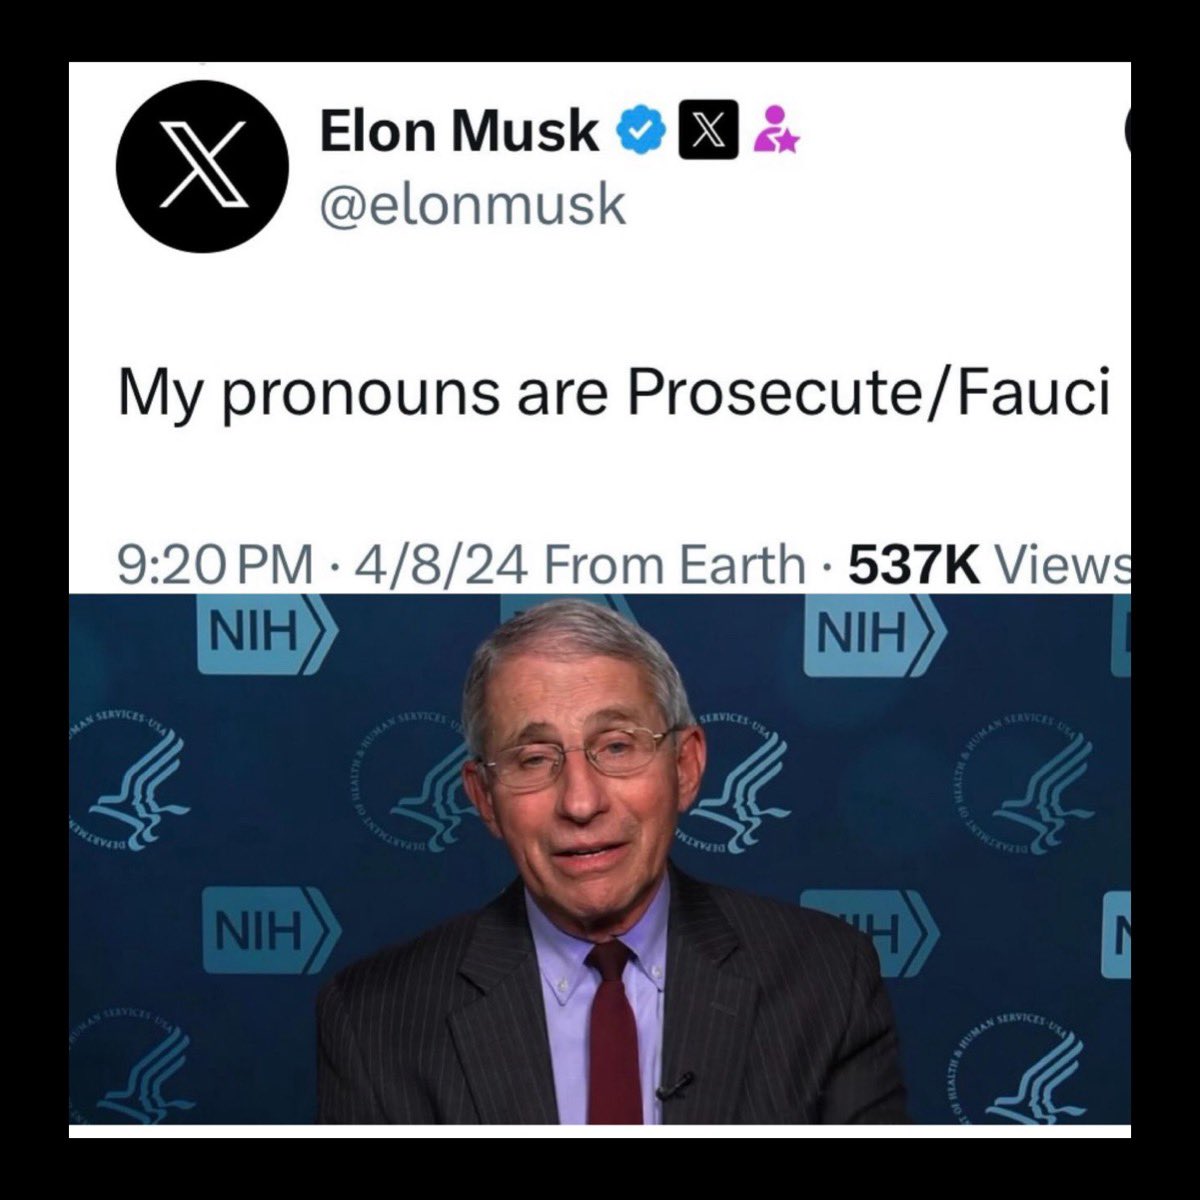 Love this. Do you agree that Fauci should be prosecuted and jailed for crimes against humanity?